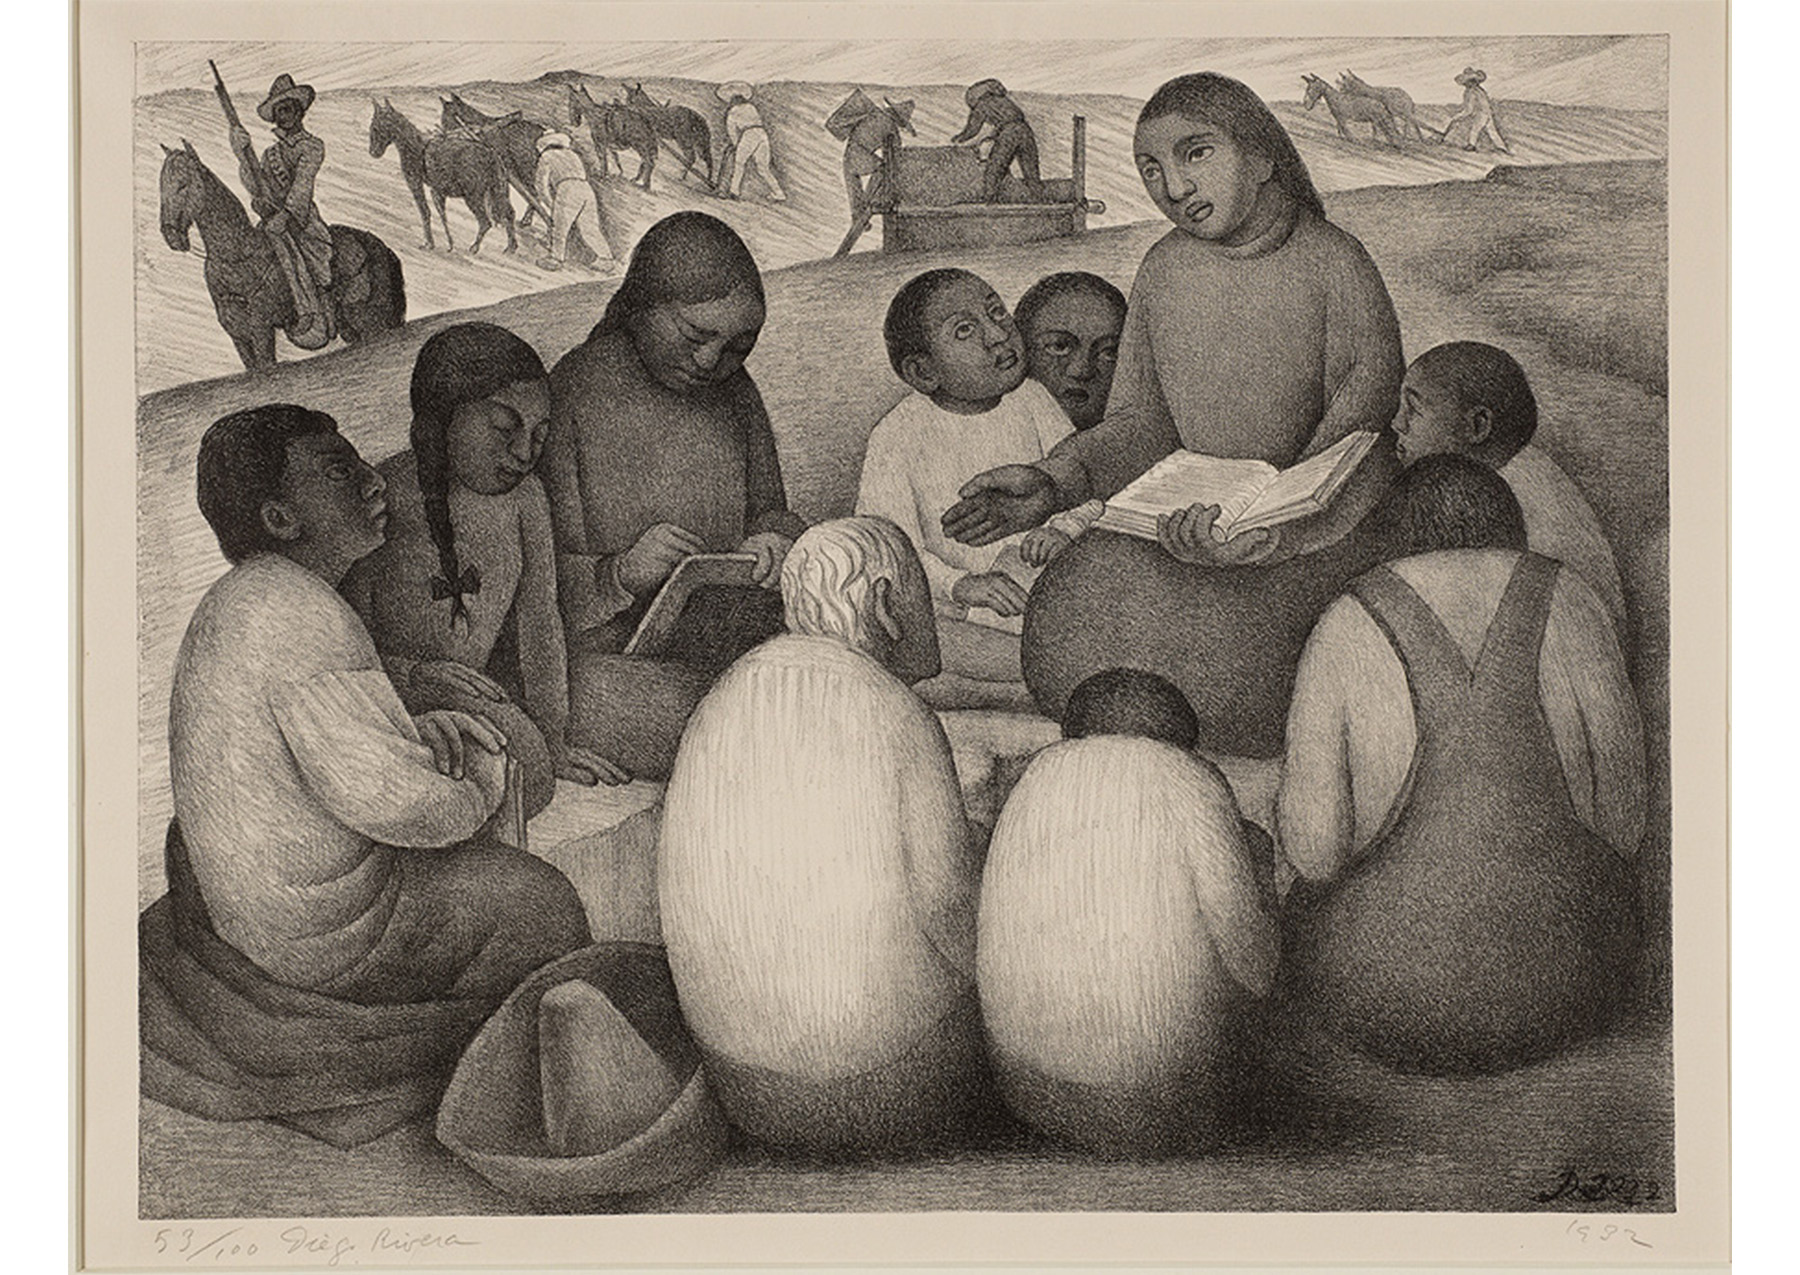 group of children sitting in a circle, looking at a woman carrying a book. in the background, men in uniforms riding horses up a small hill. 